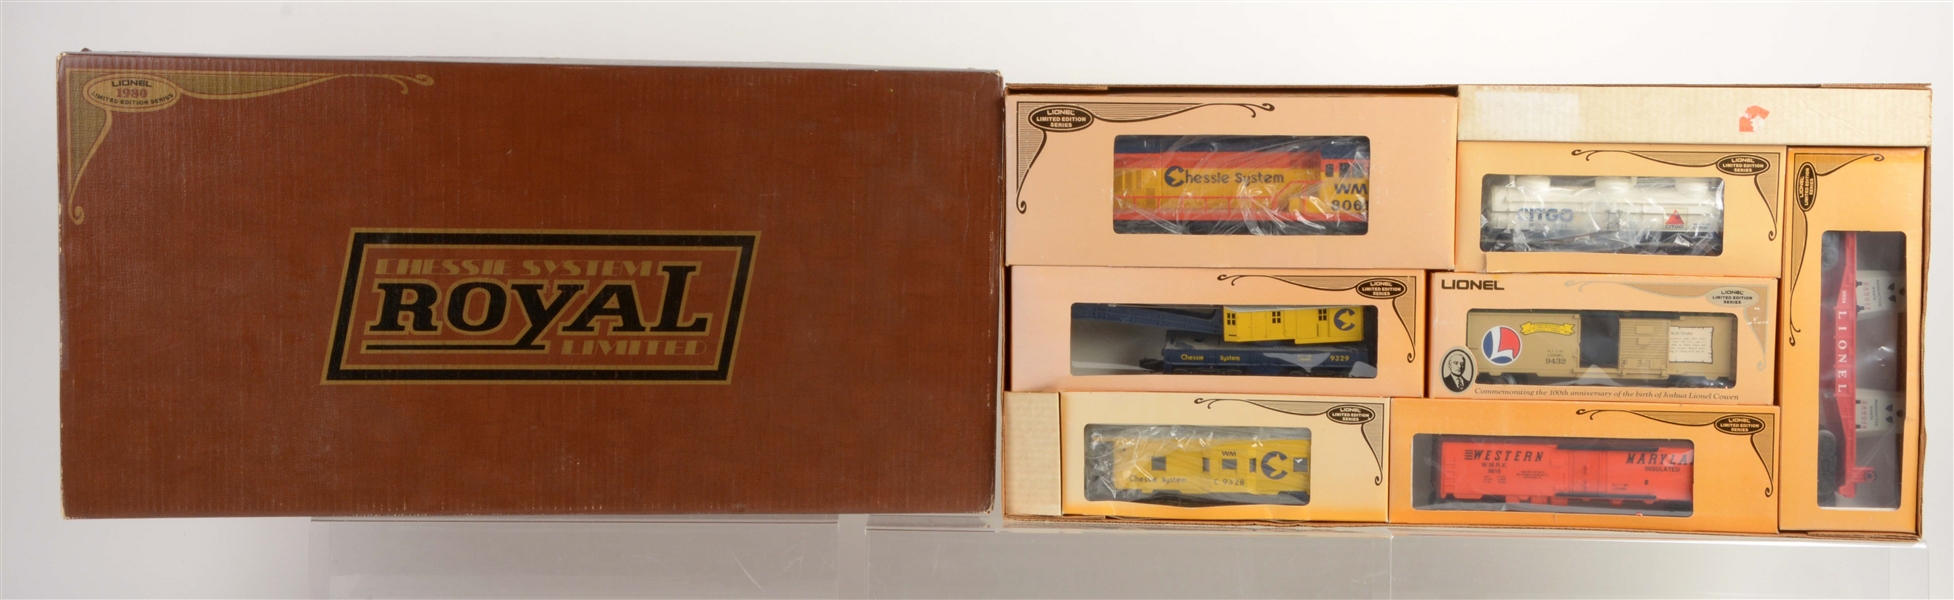 LOT OF 2: LIONEL CHESSIE ROYAL AND MILWAUKEE LIMITED BOXED SETS.	